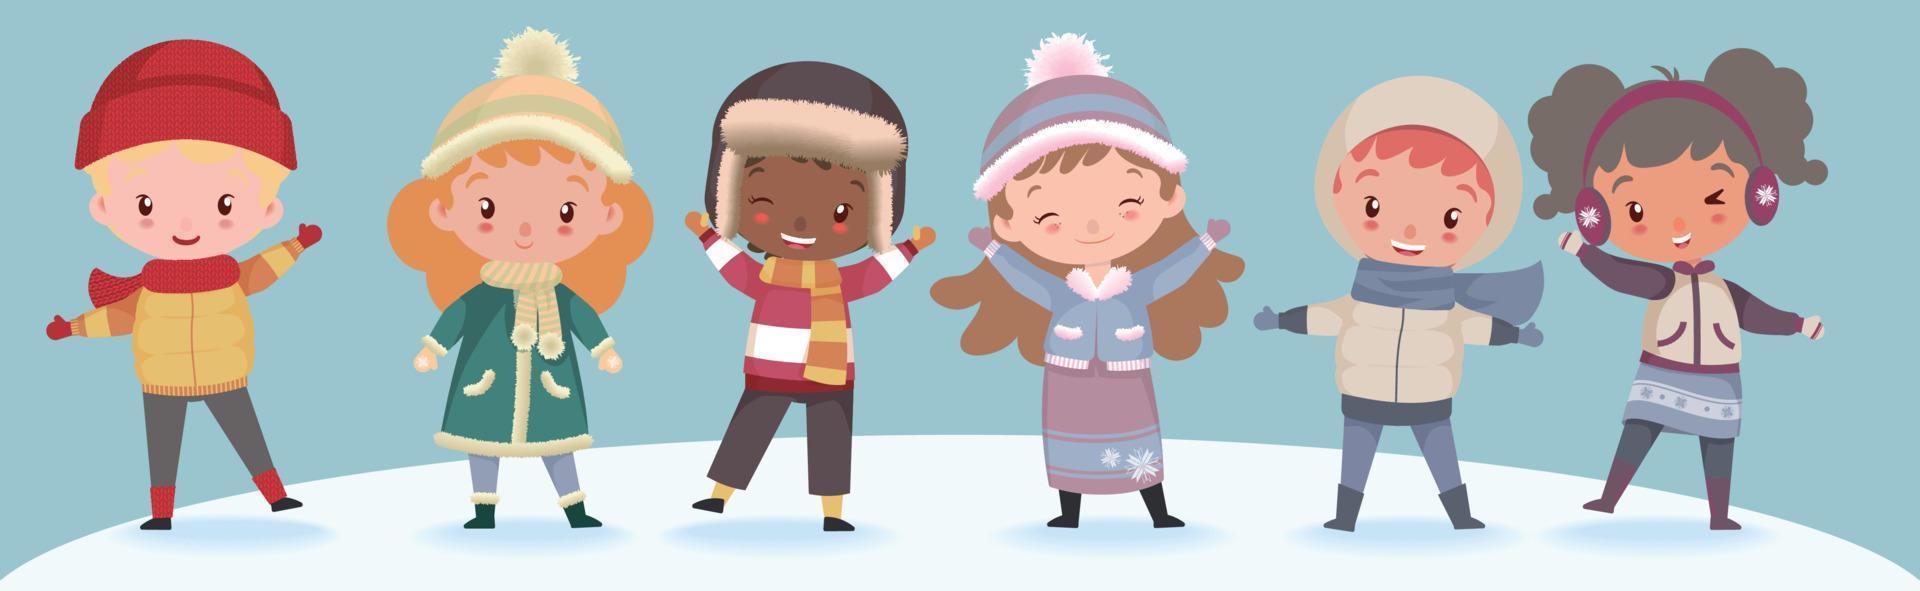 Cute kids in warm winter clothes vector